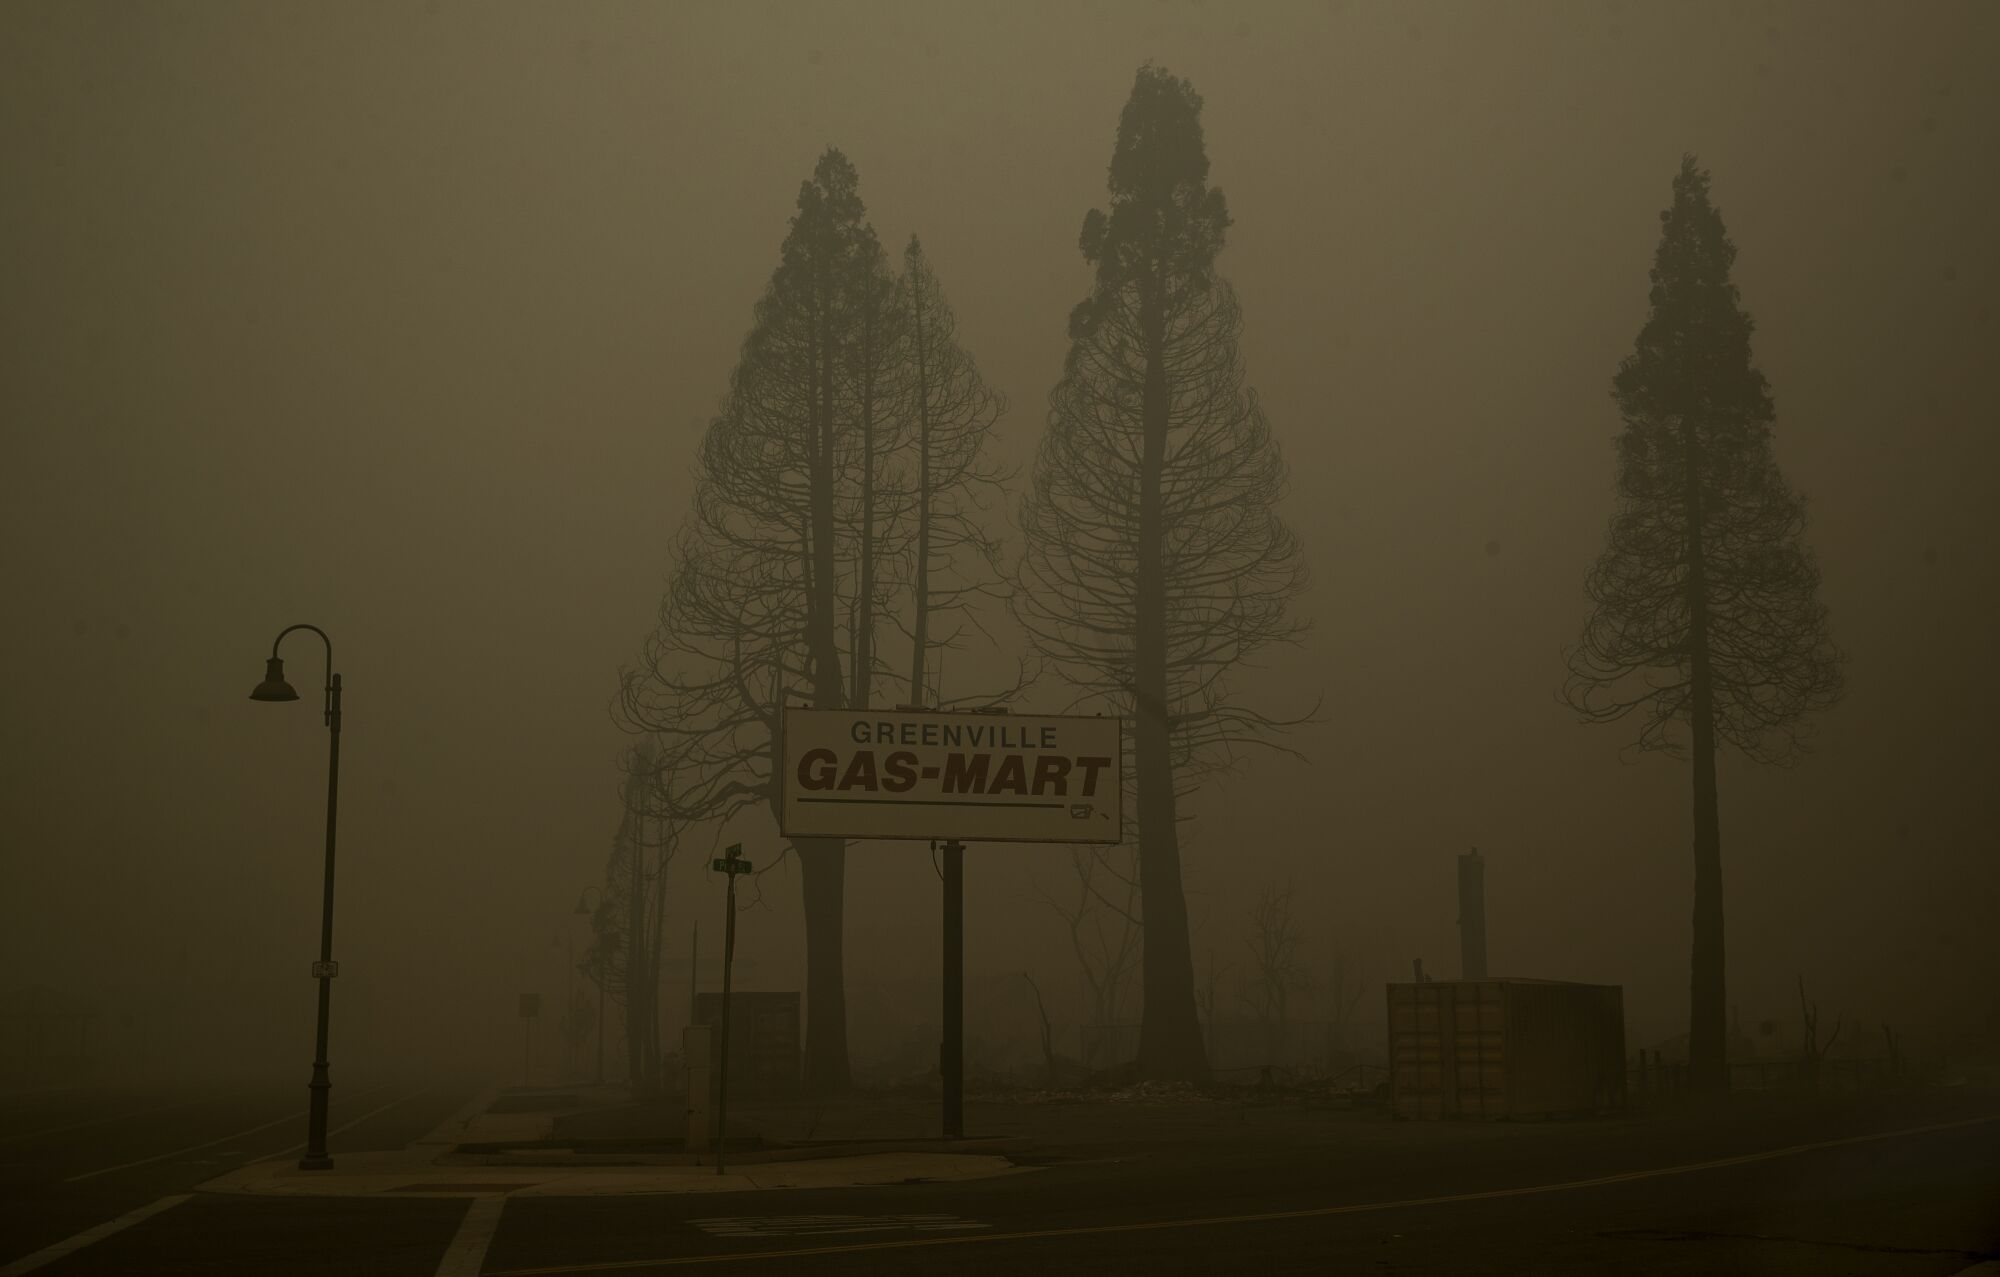 A 'Greenville Gas-Mart' sign is surrounded by thick smoke.